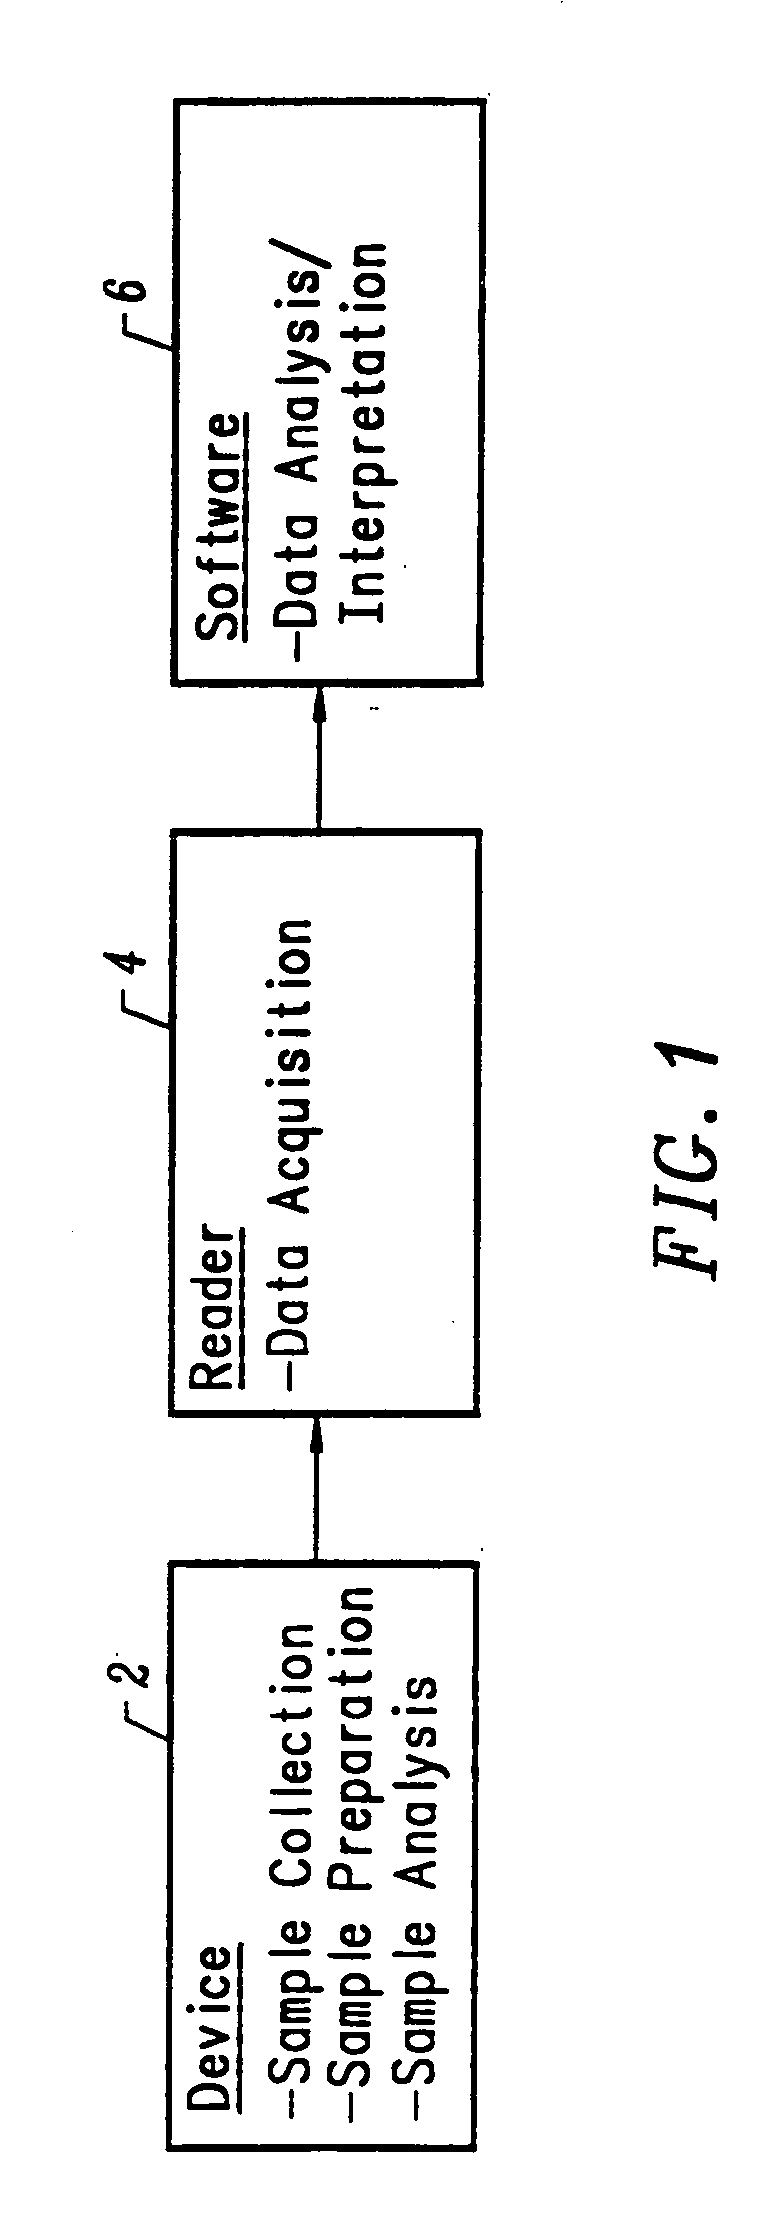 Integrated nucleic acid diagnostic device